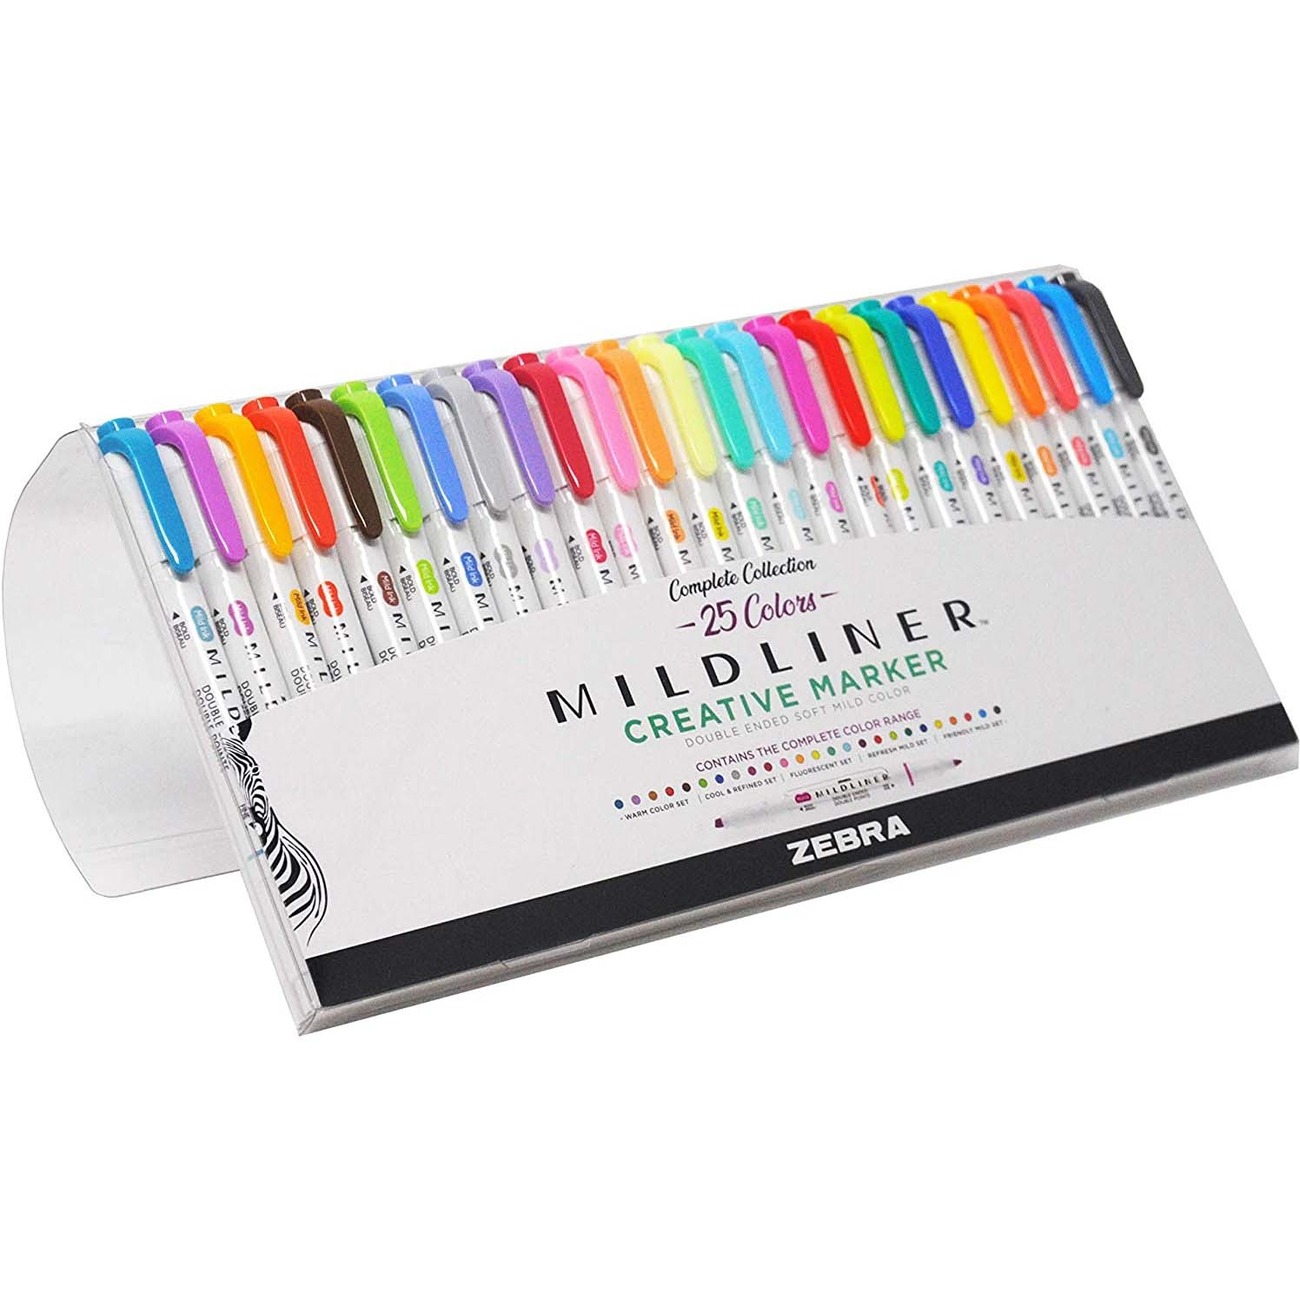 Zebra Mildliner Double Ended Creative Markers - Fluorescent and Cool  Colors, Set of 10